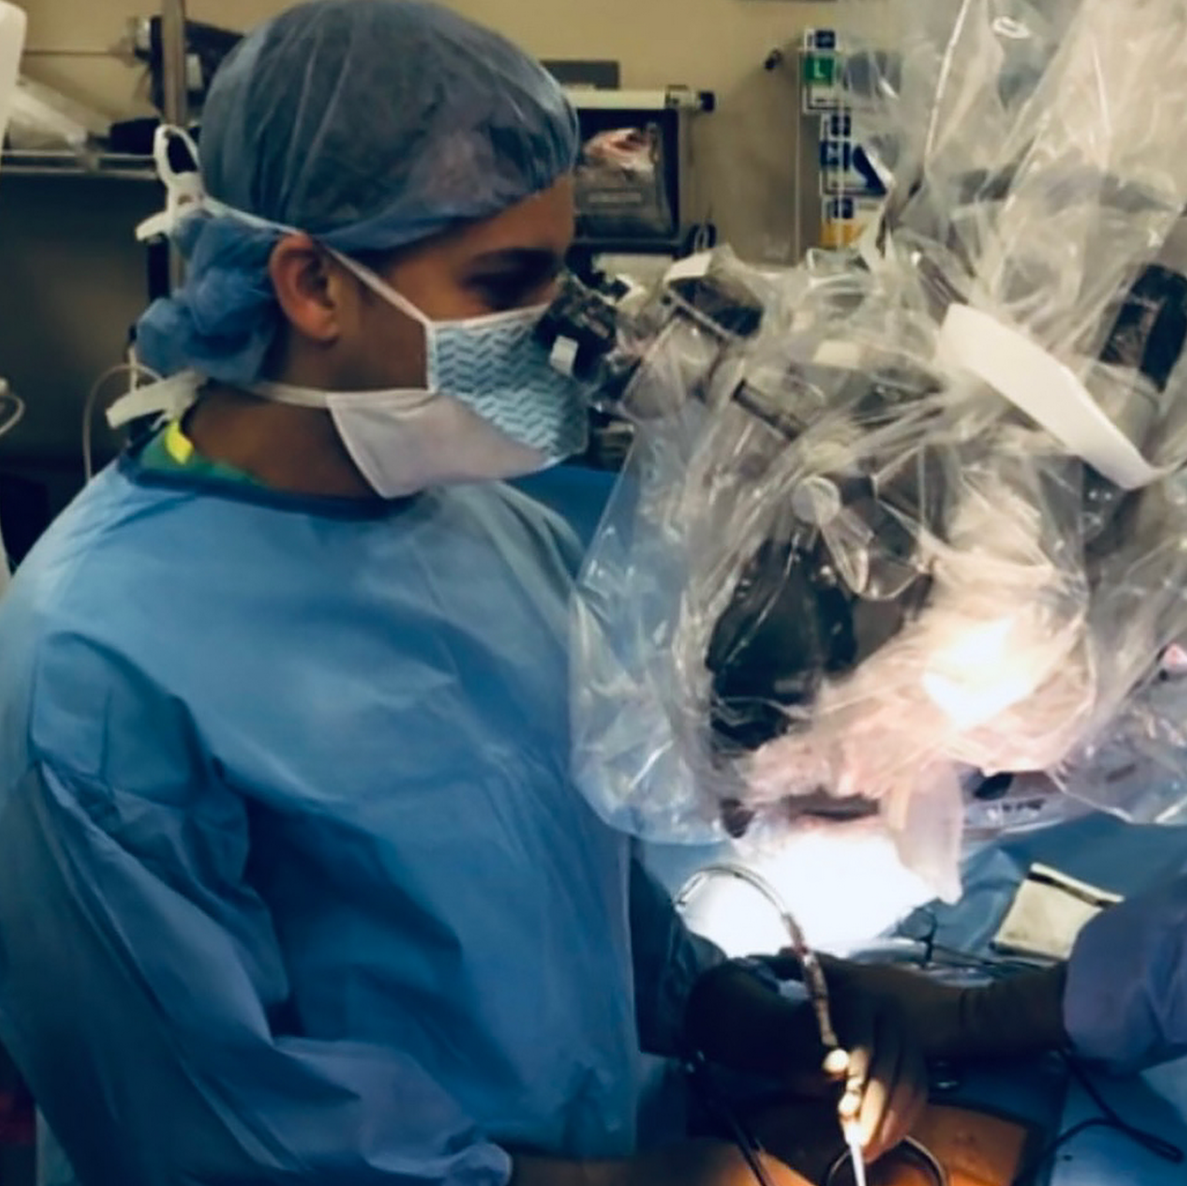 endoscopic spine surgery with Dr. Kris Radclif